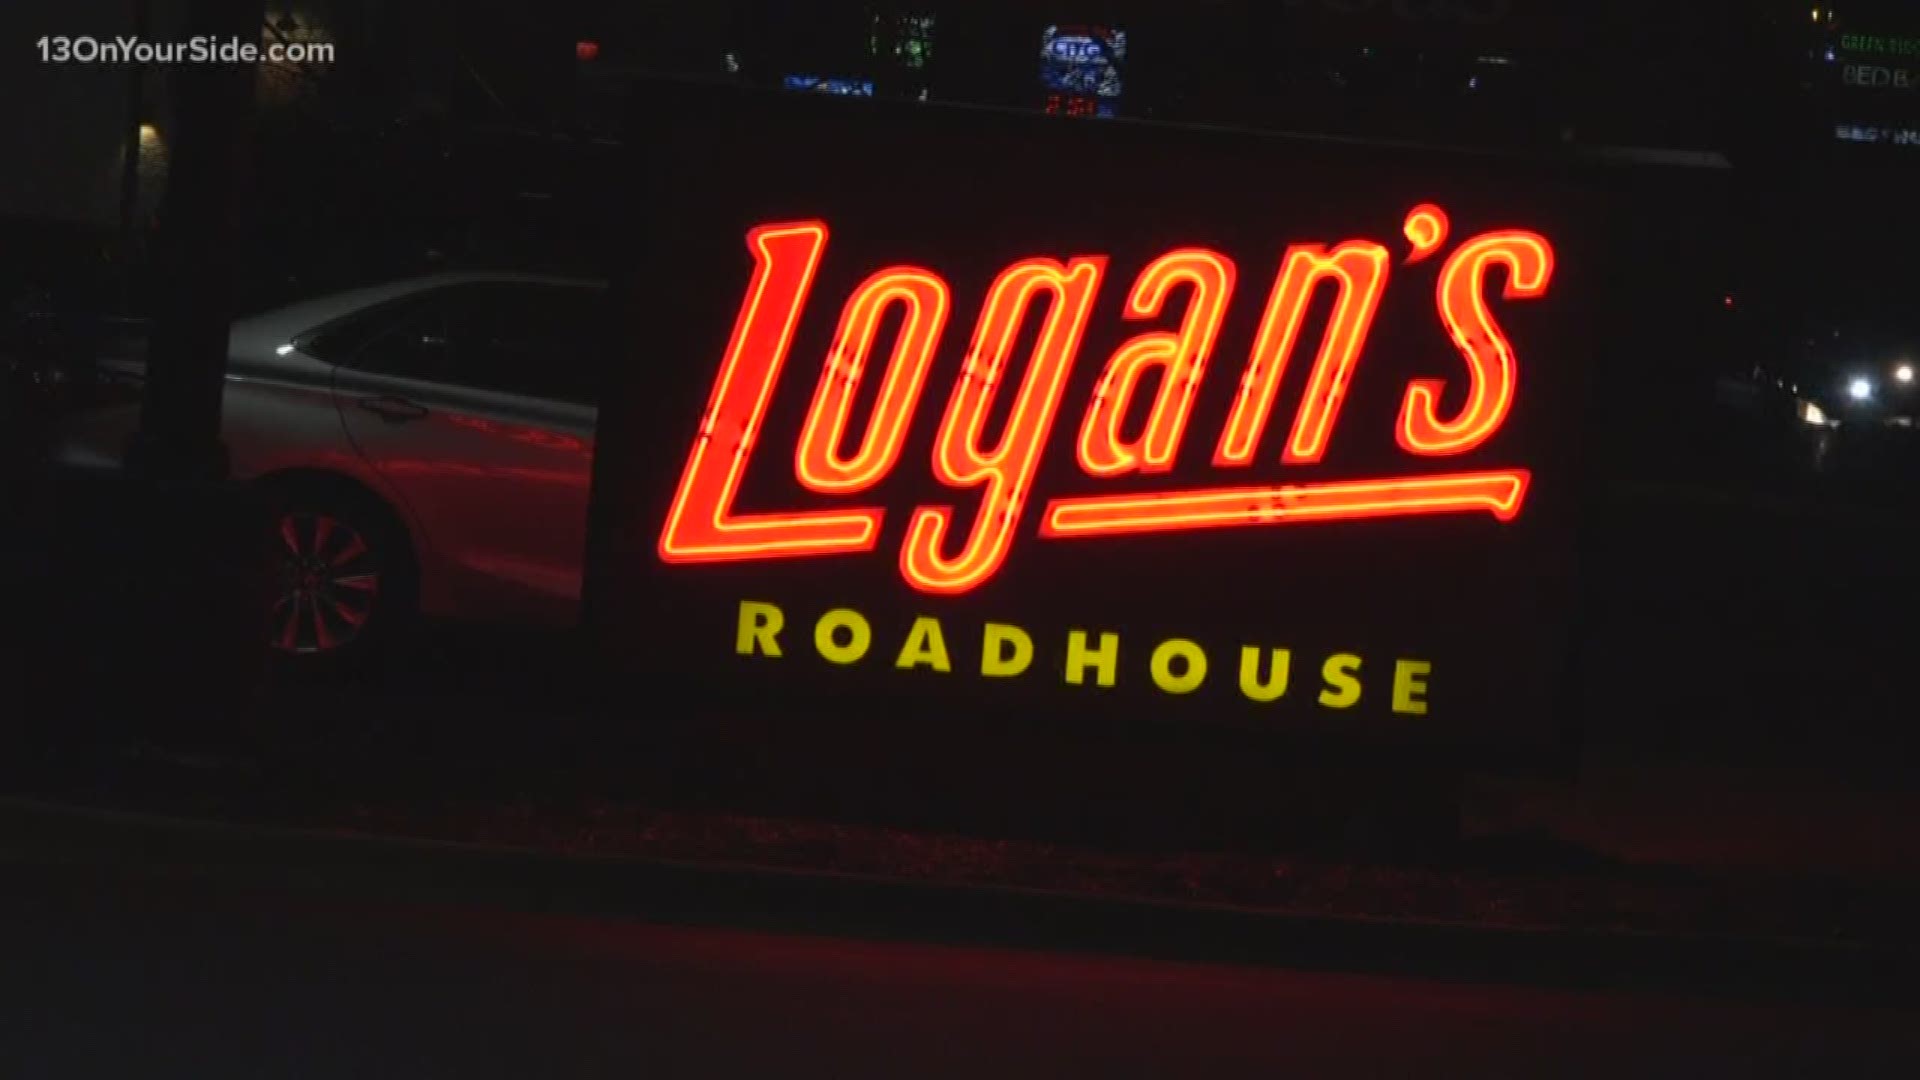 The parent company of Logan's Roadhouse, Old Chicago and two other restaurants has filed for bankruptcy.